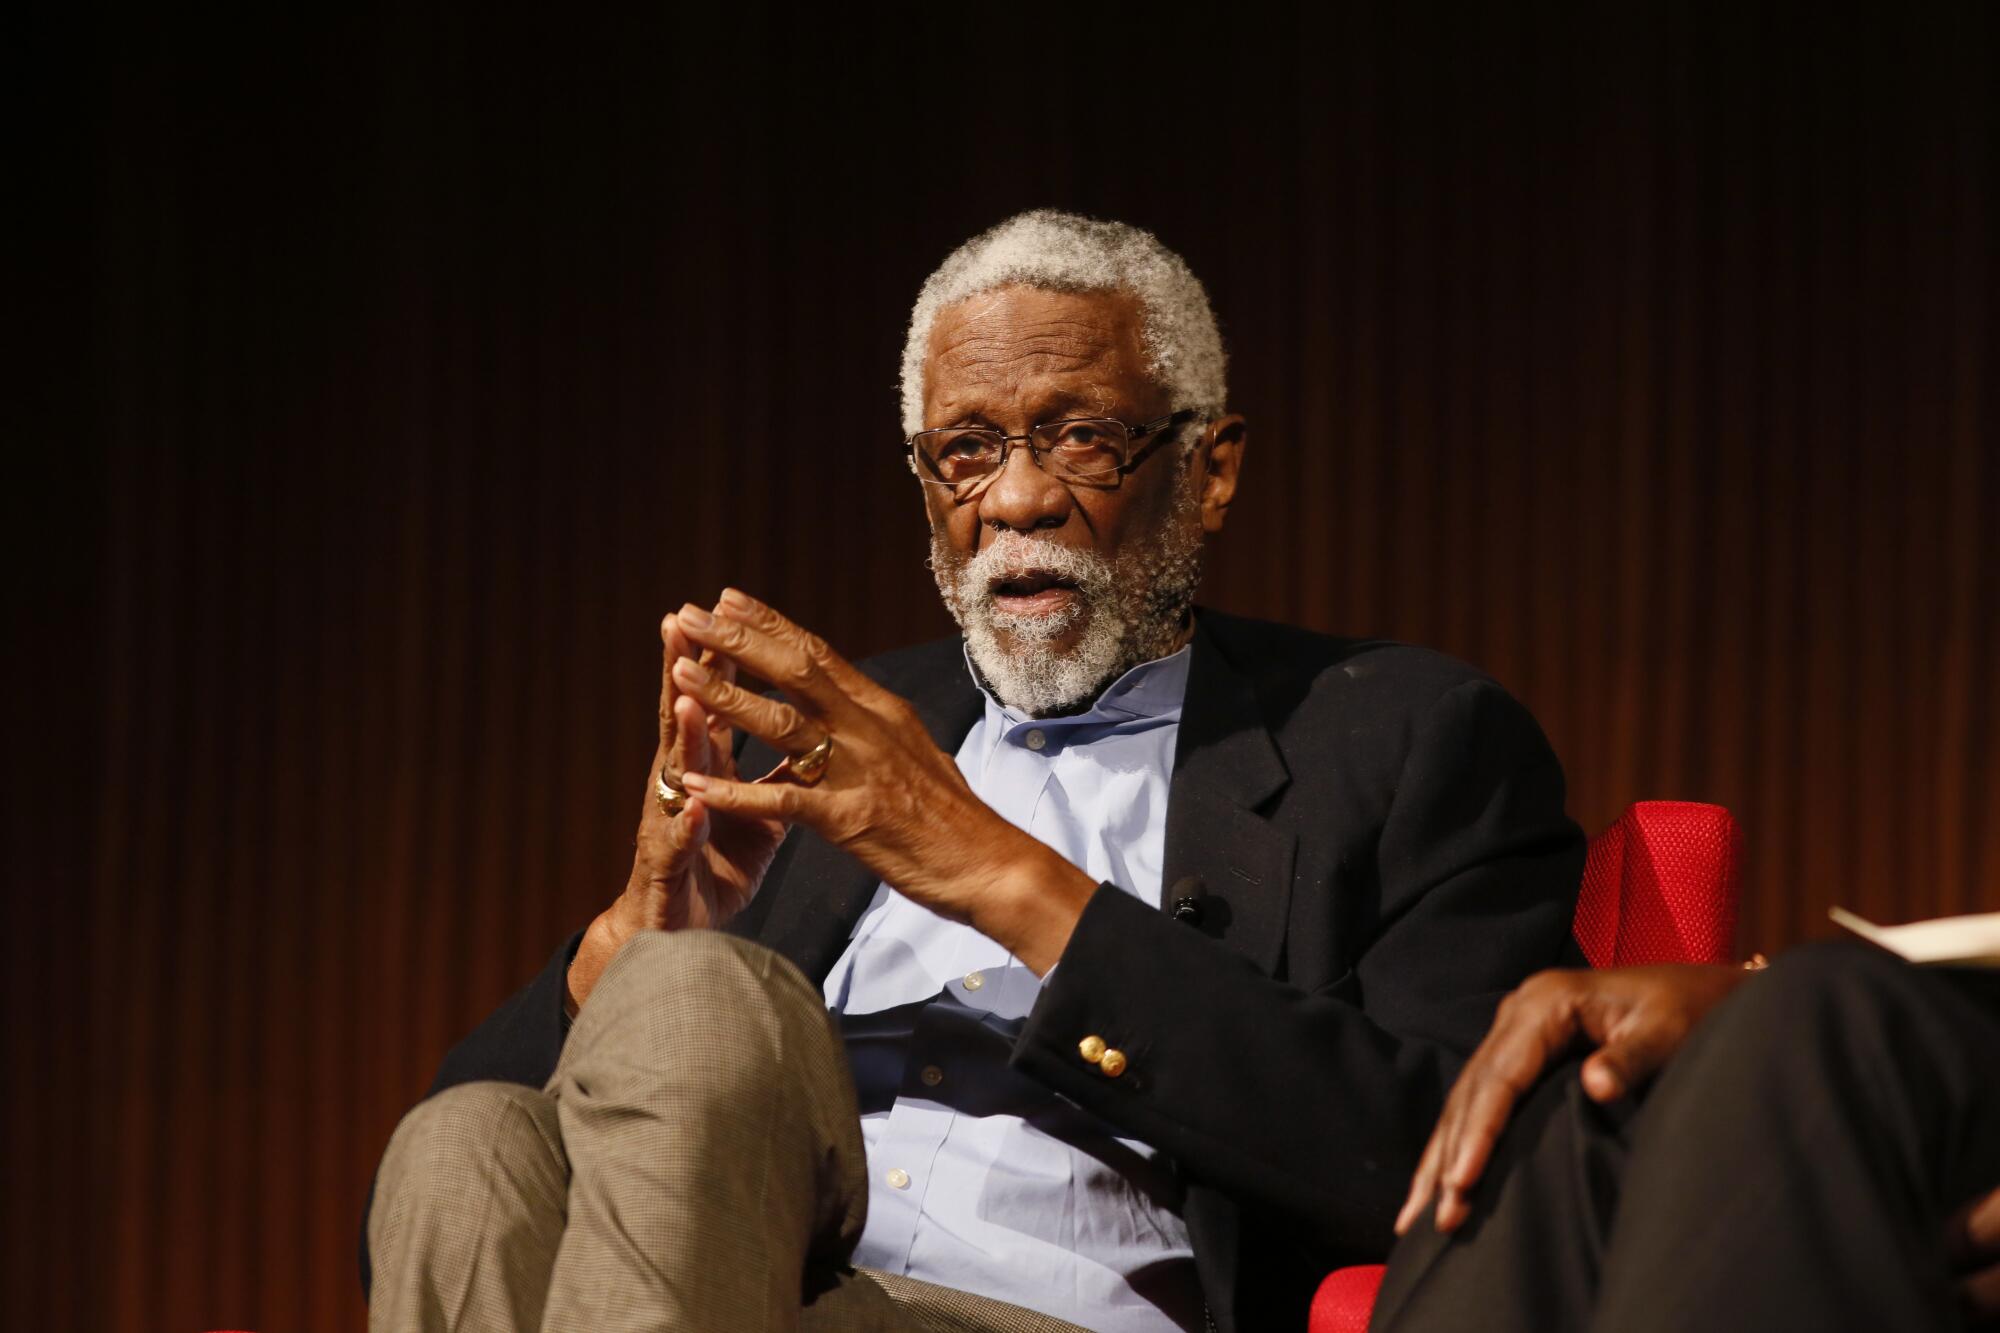 Bill Russell speaks as part of a panel in 2018.